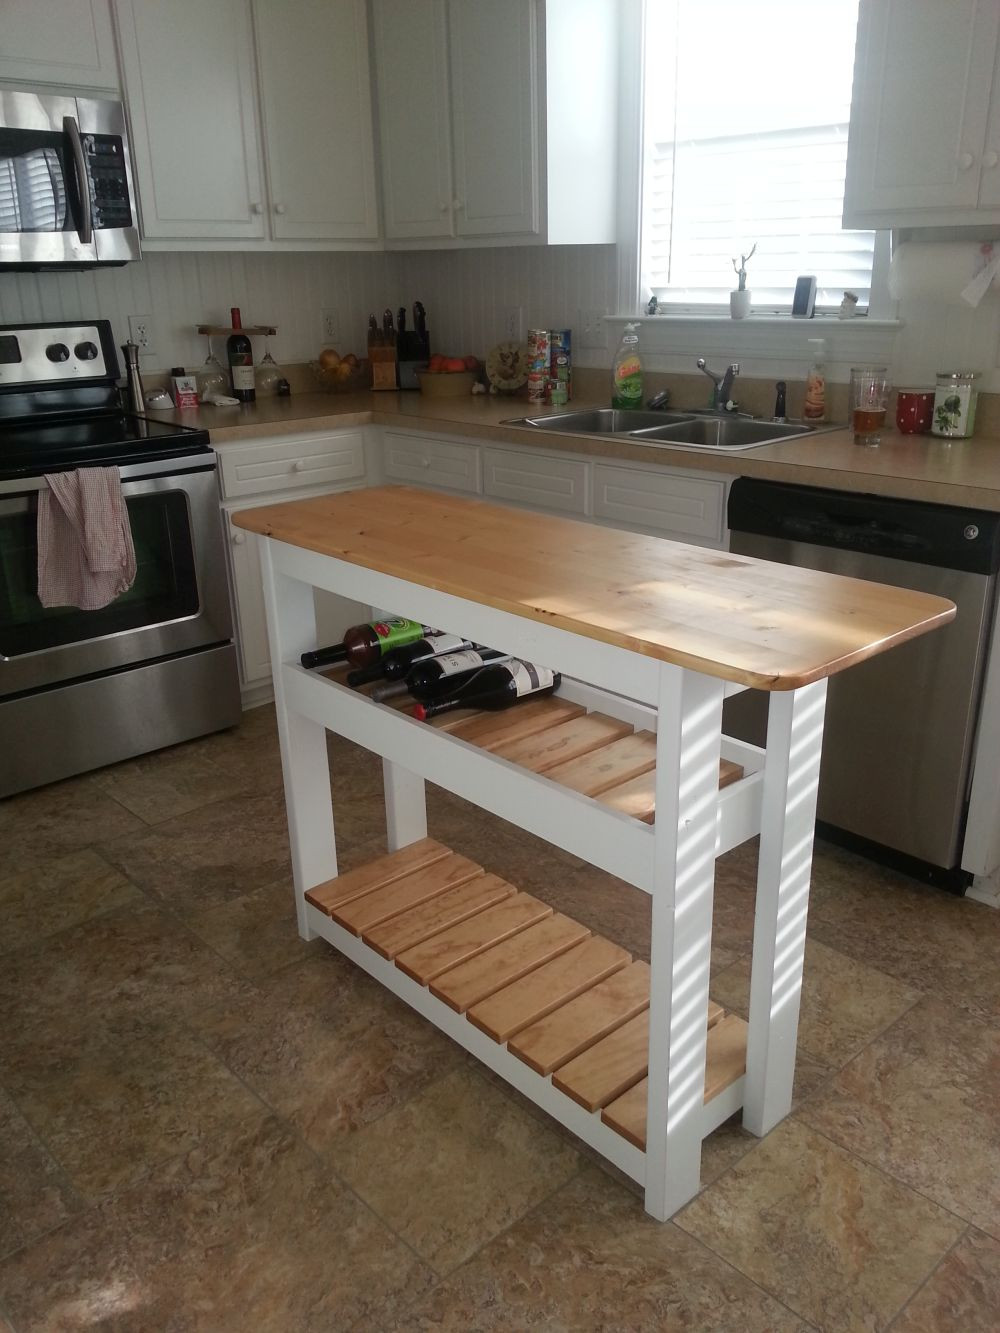 Diy Small Kitchen Island
 20 DIY Kitchen Island Ideas That Can Transform Your Home